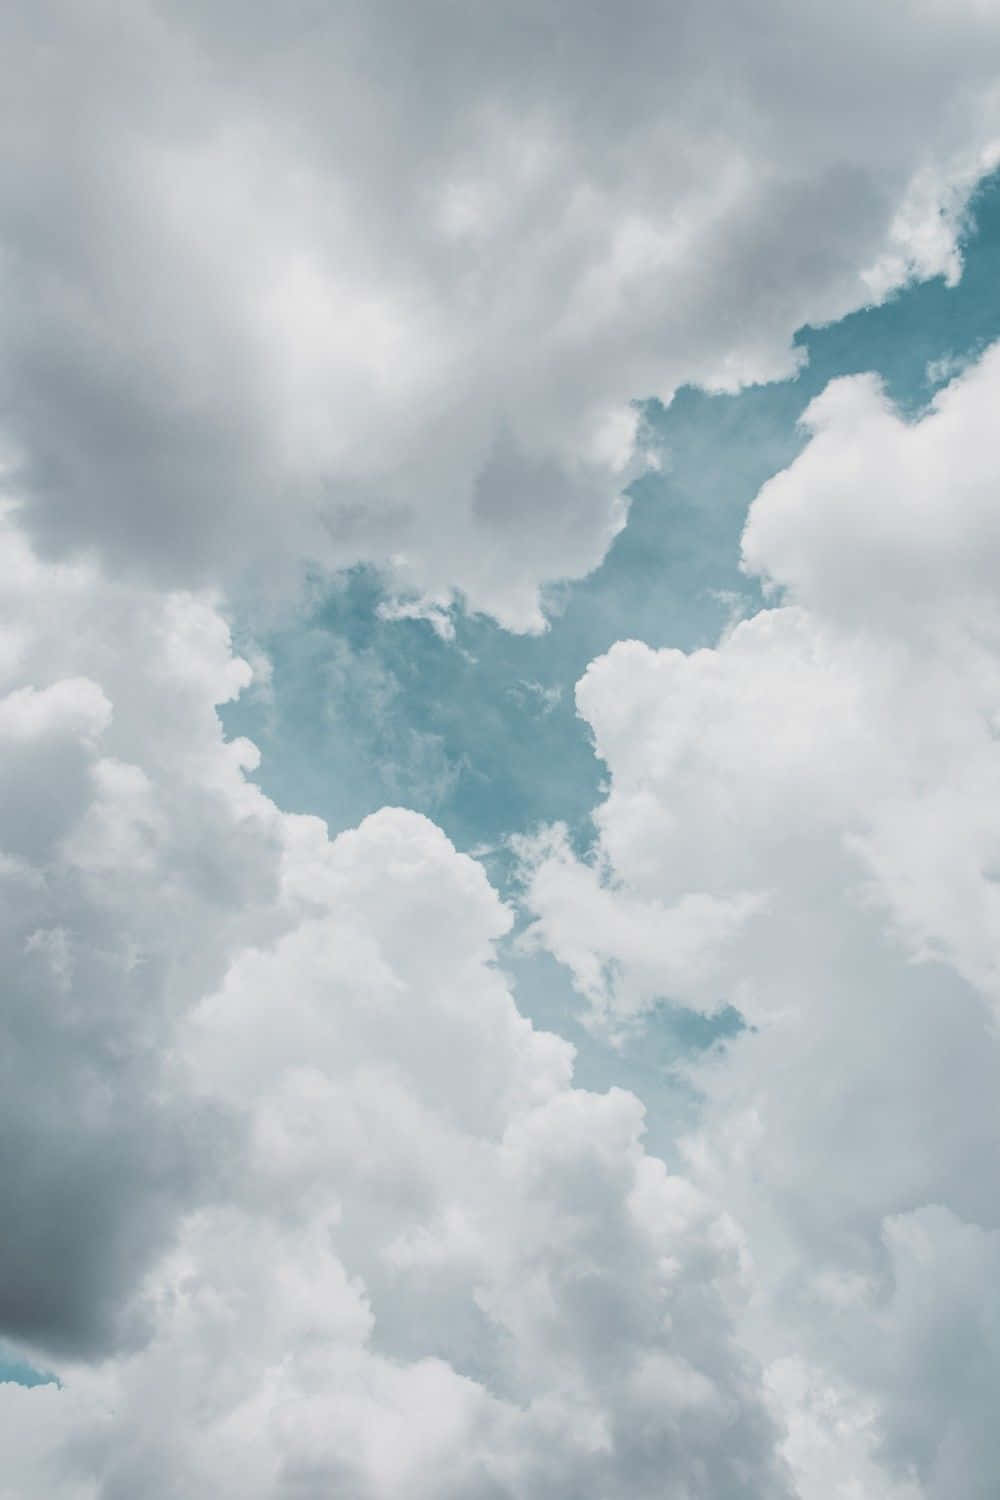 Enjoy a peaceful moment in nature with this stunning white cloud background.